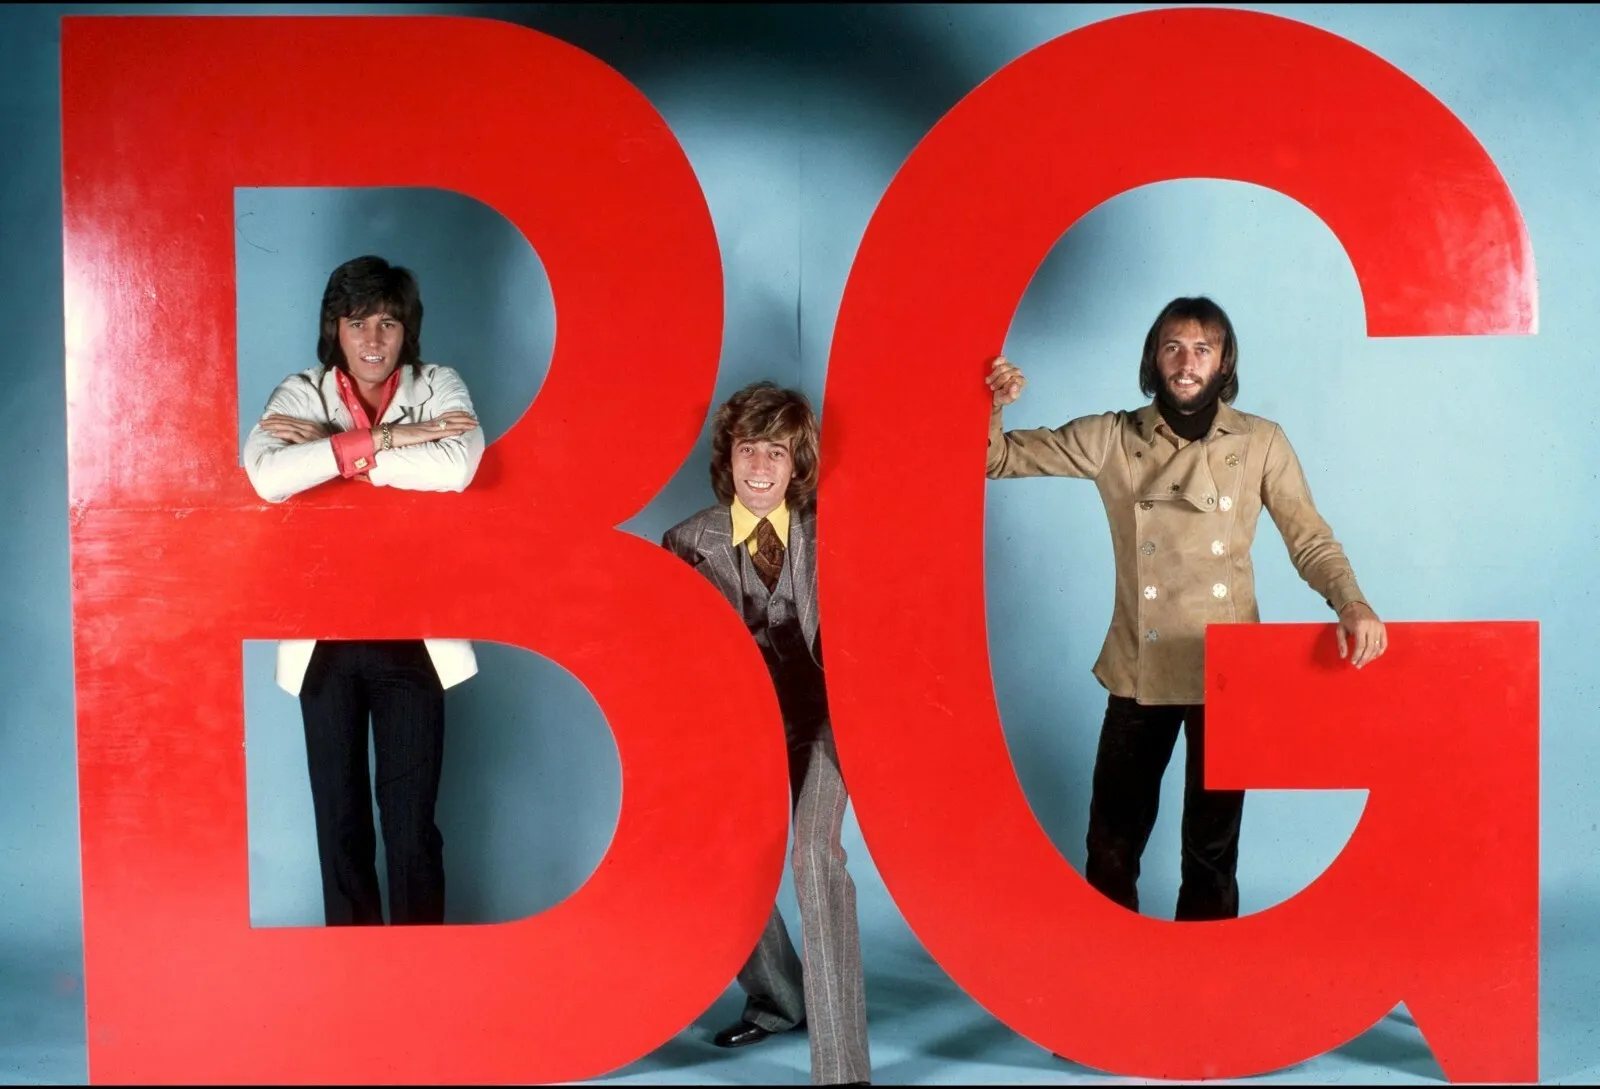 The Bee Gees - Music Photo #e-105